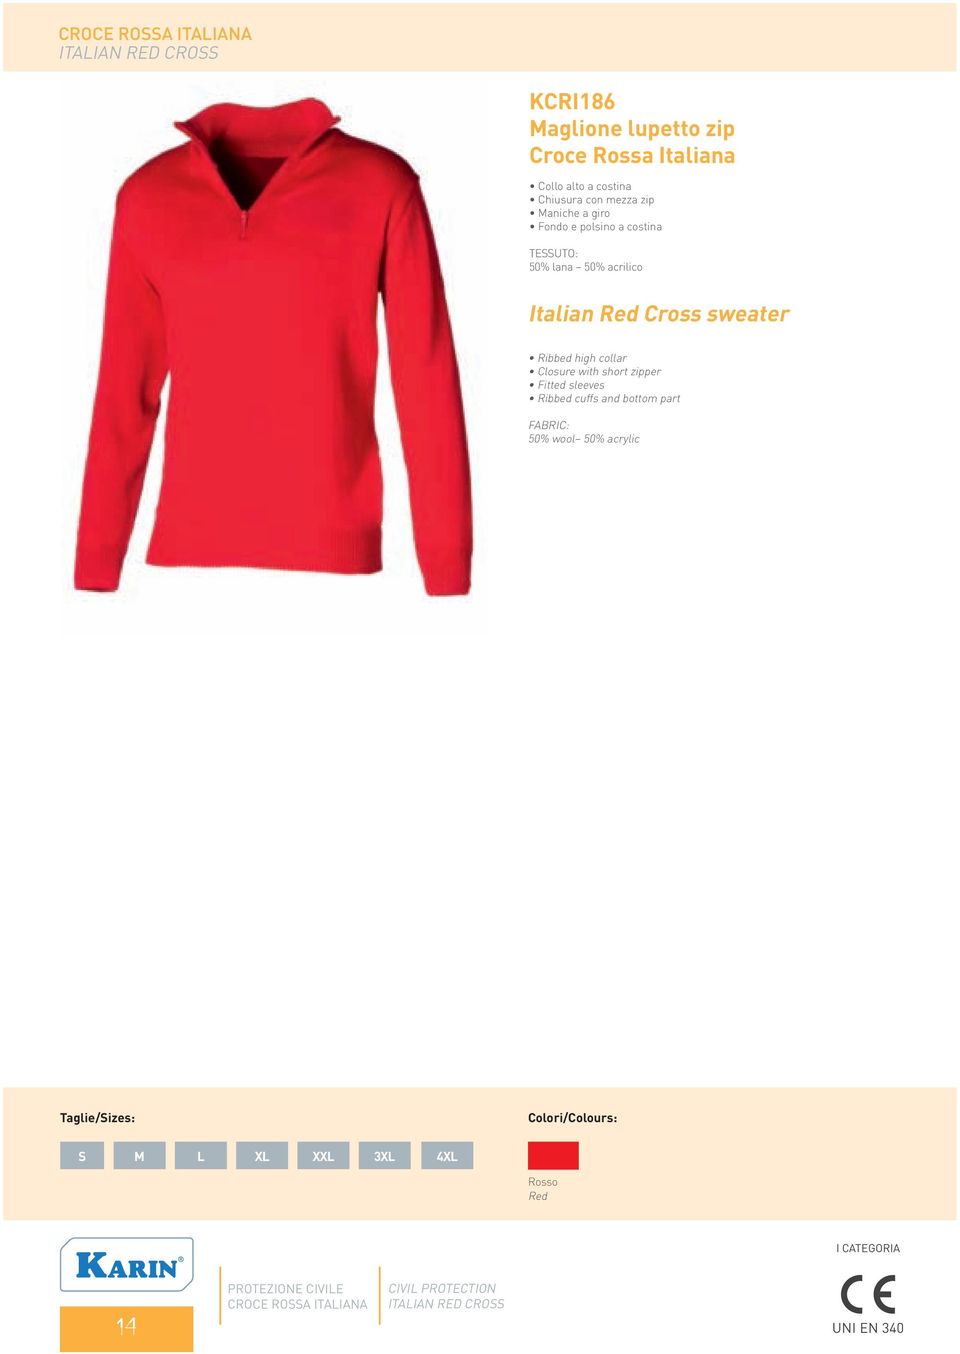 Ribbed high collar Closure with short zipper Fitted sleeves Ribbed cuffs and bottom part FABRIC: